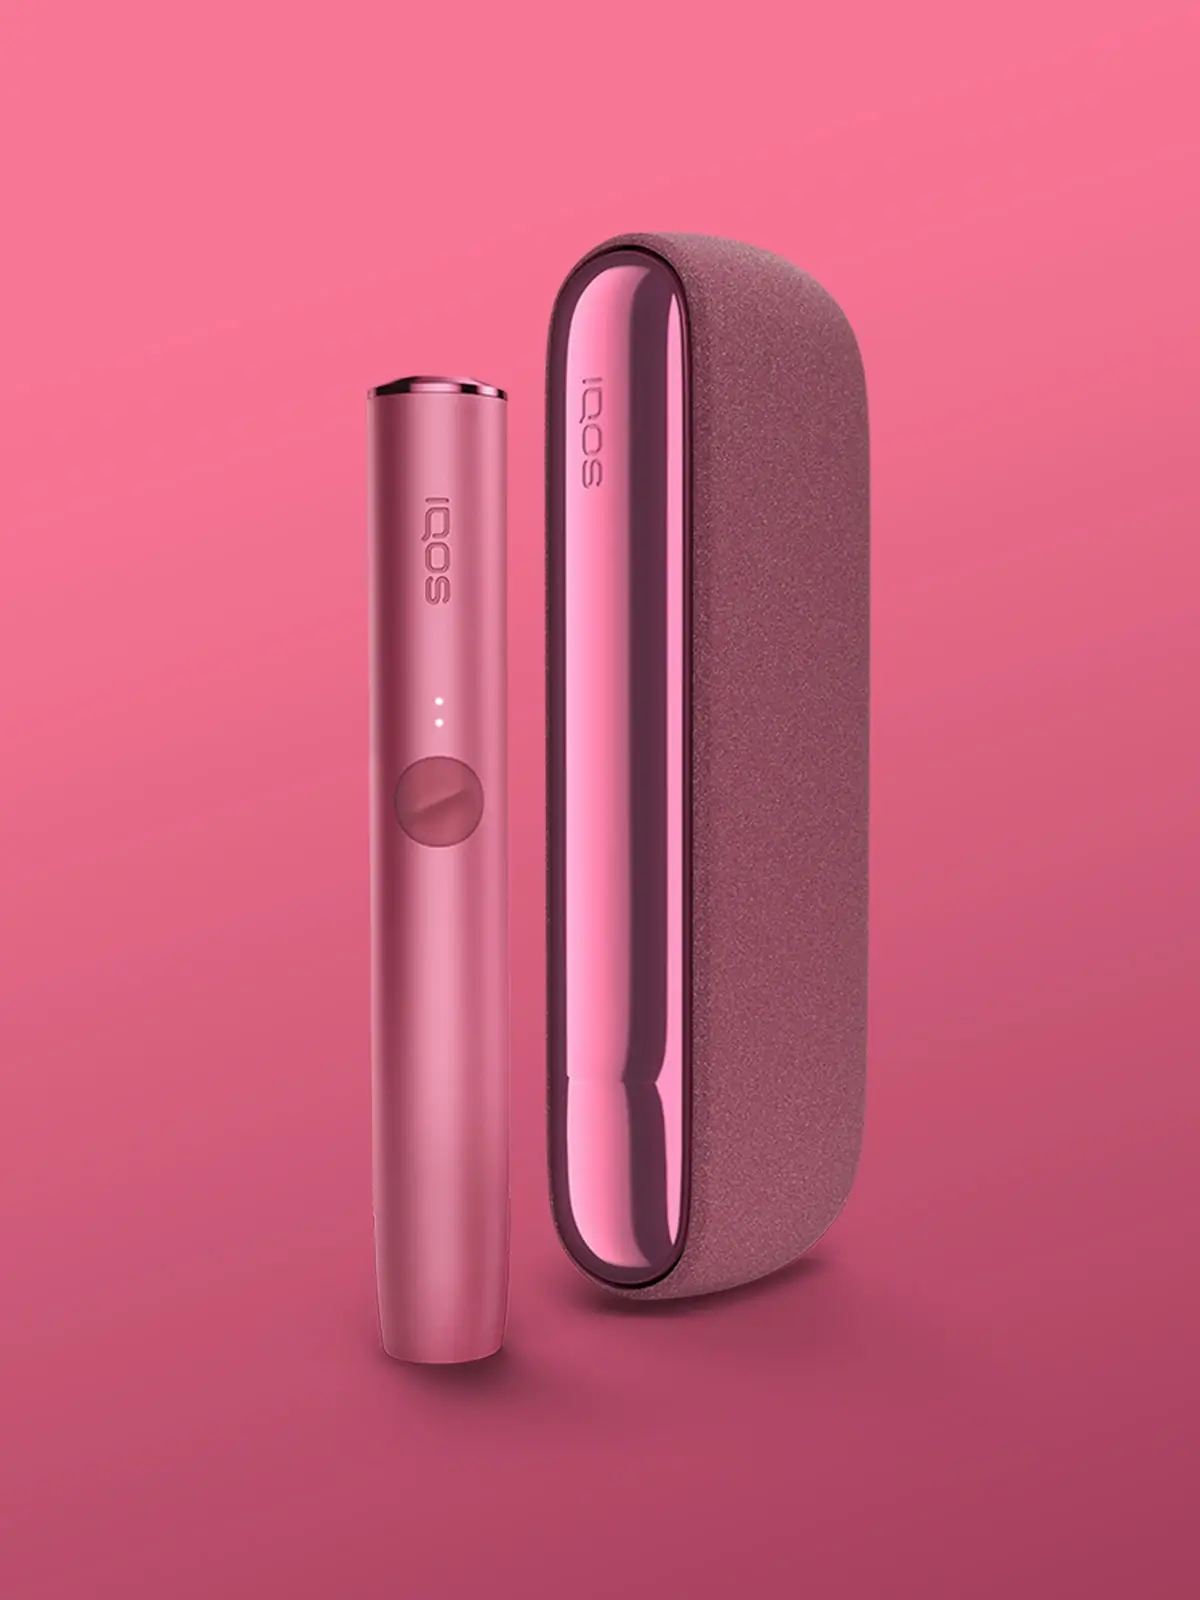 Shop Iqos Iluma One Case with great discounts and prices online - Feb 2024